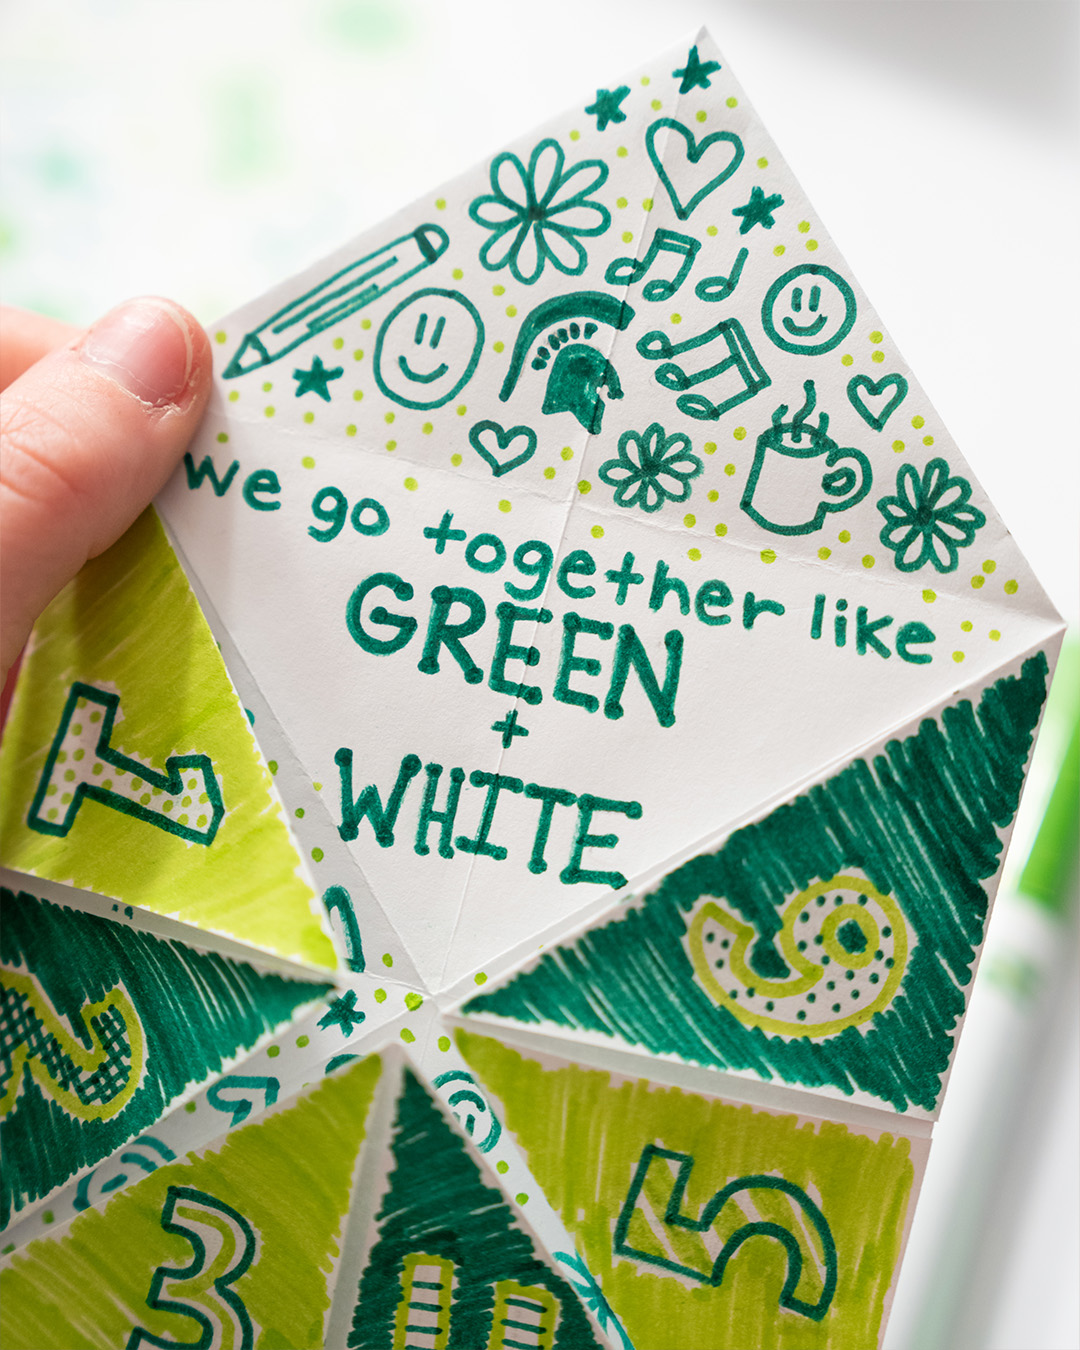 Origami fortune teller decorated with green marker designs; one flap open reading we go together like green + white